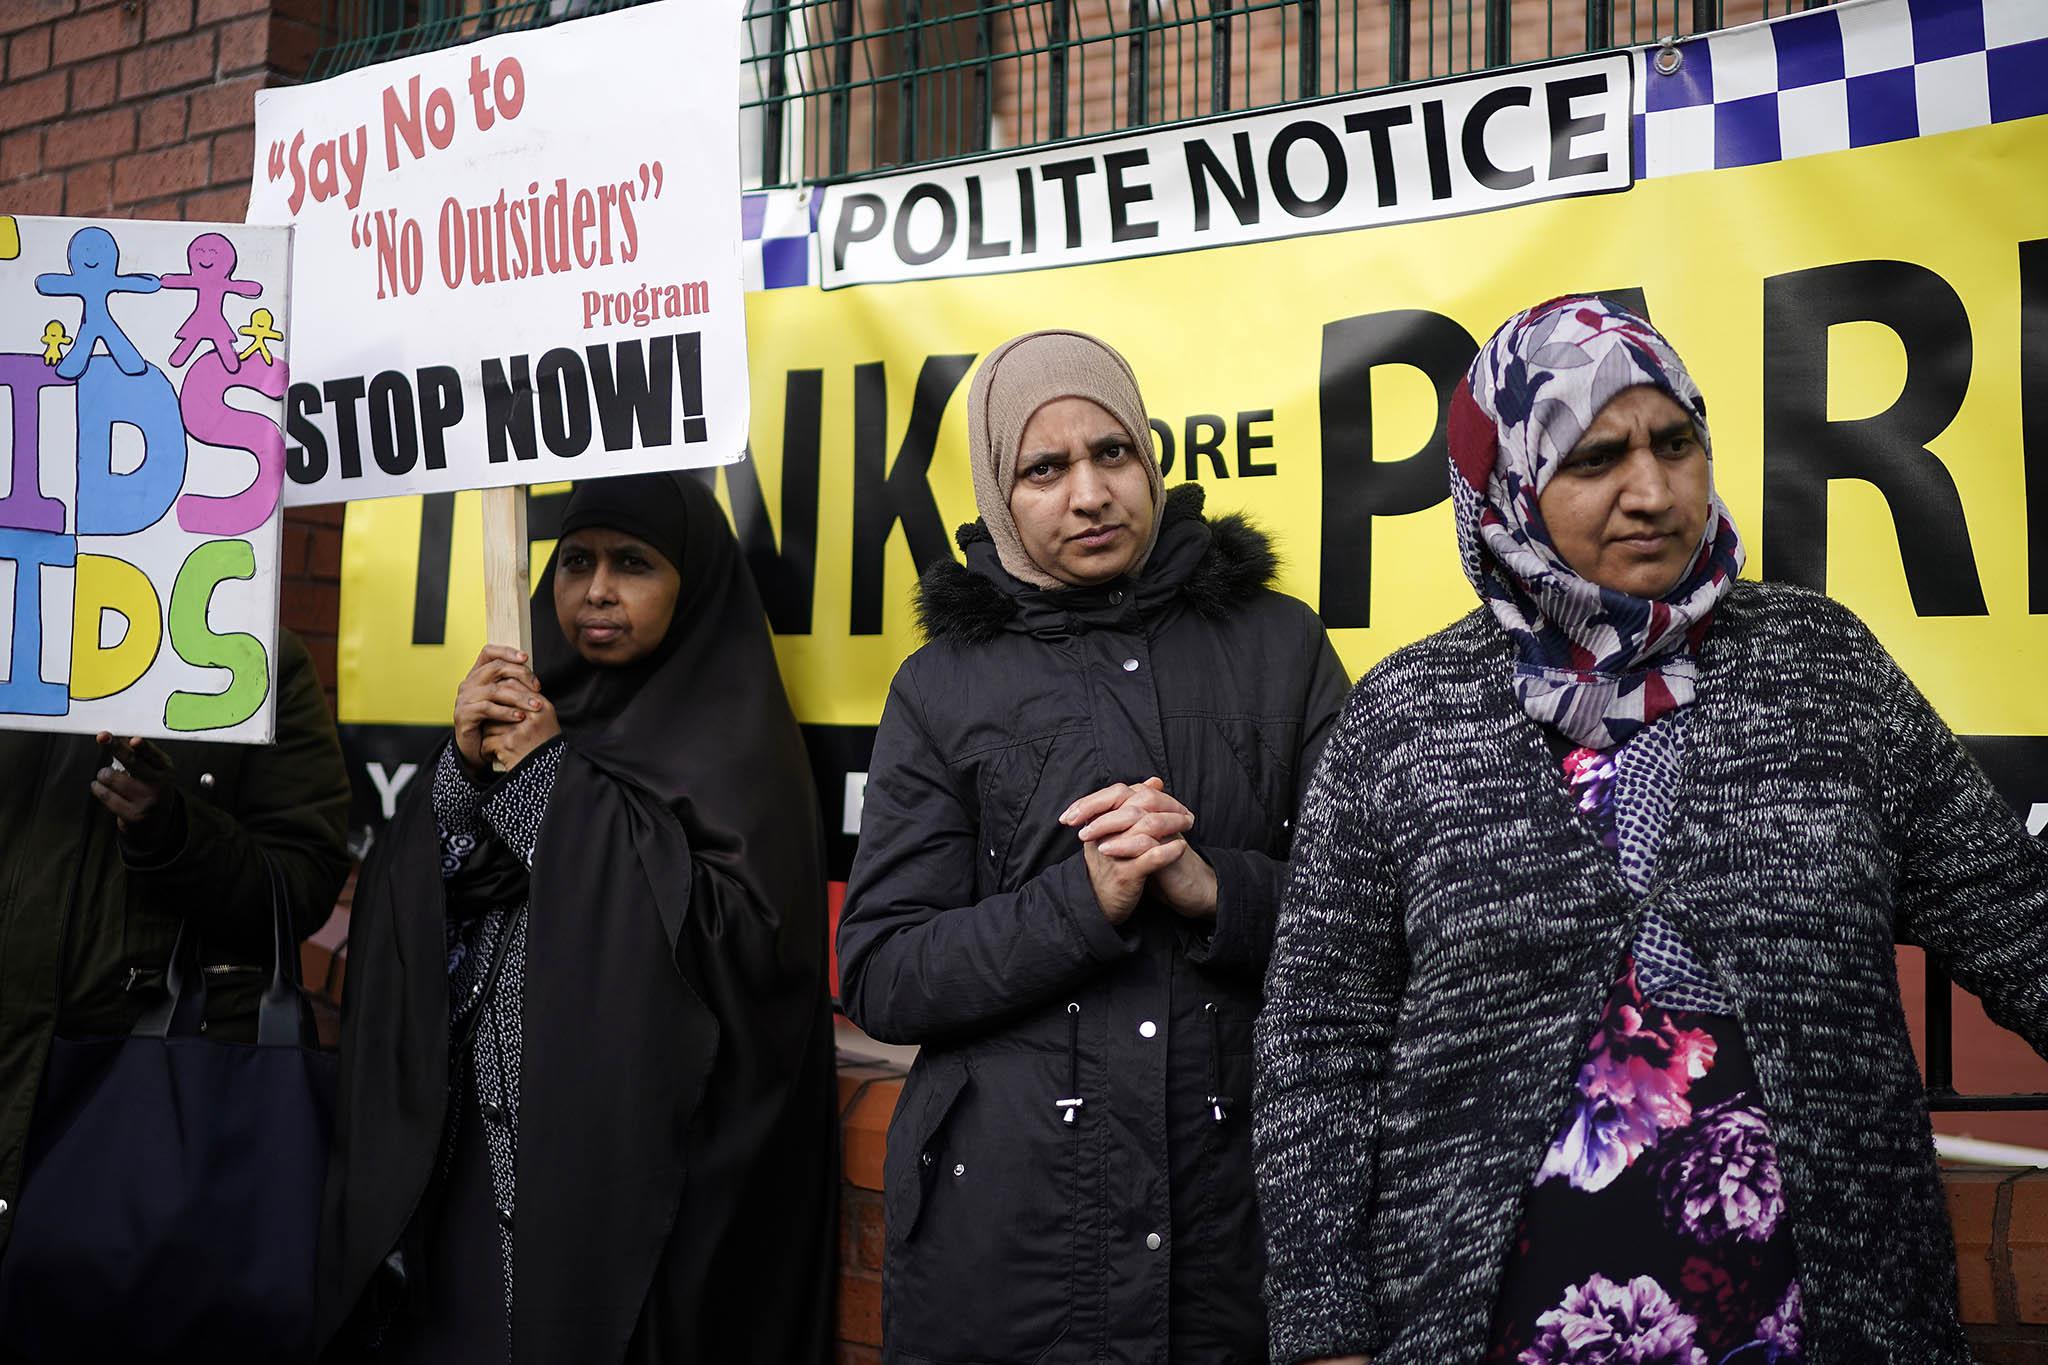 Protests have taken place outside Parkfield School in Birmingham